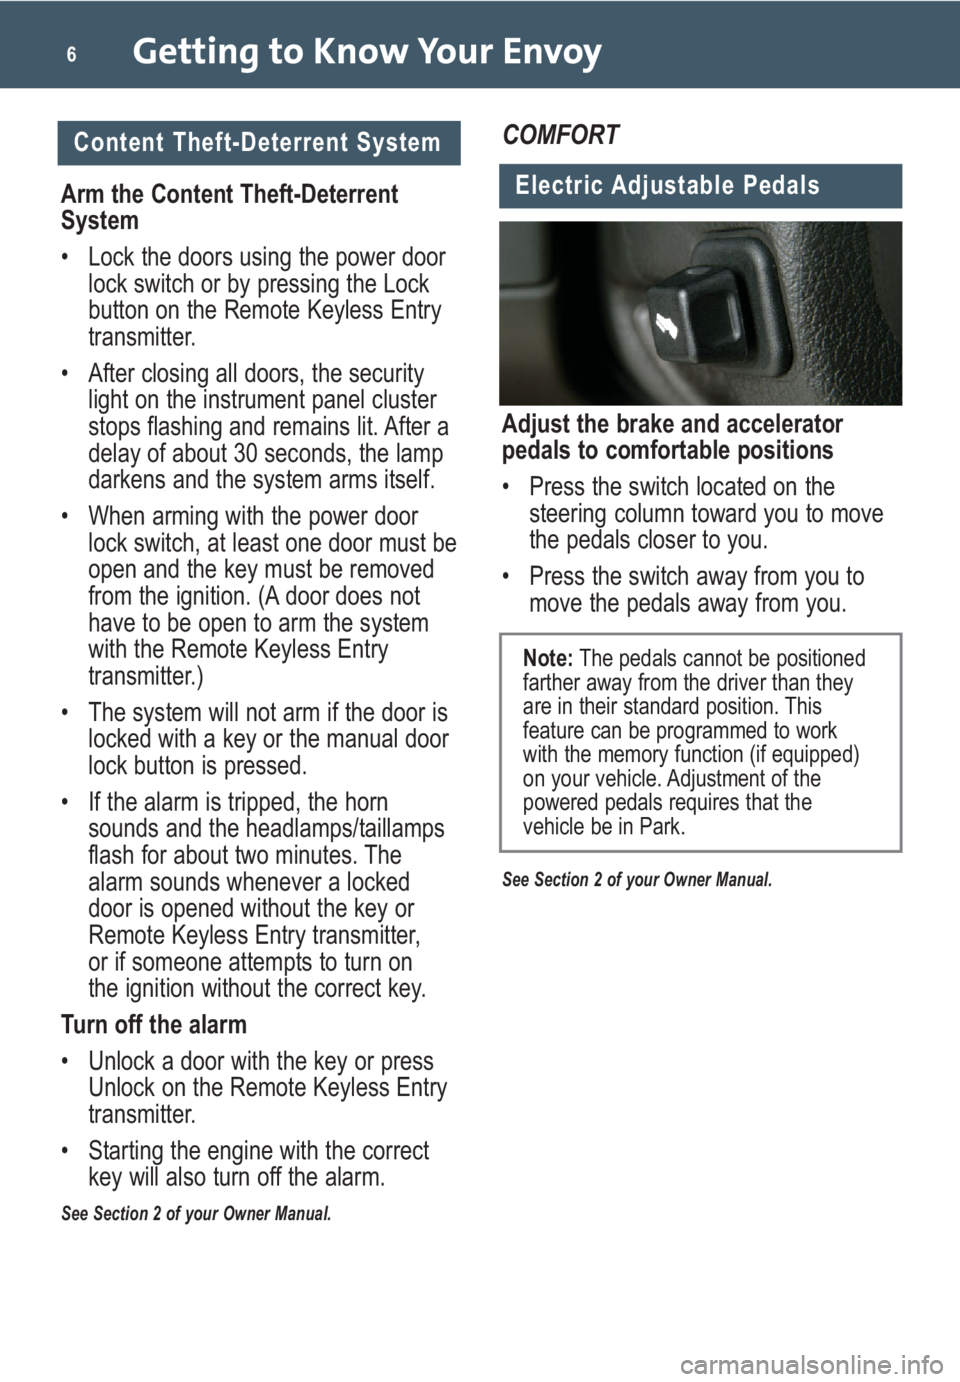 GMC ENVOY 2009  Get To Know Guide Getting to Know Your Envoy6
Content Theft-Deterrent System
Arm the Content Theft-Deterrent
System
• Lock the doors using the power door
lock switch or by pressing the Lock
button on the Remote Keyle